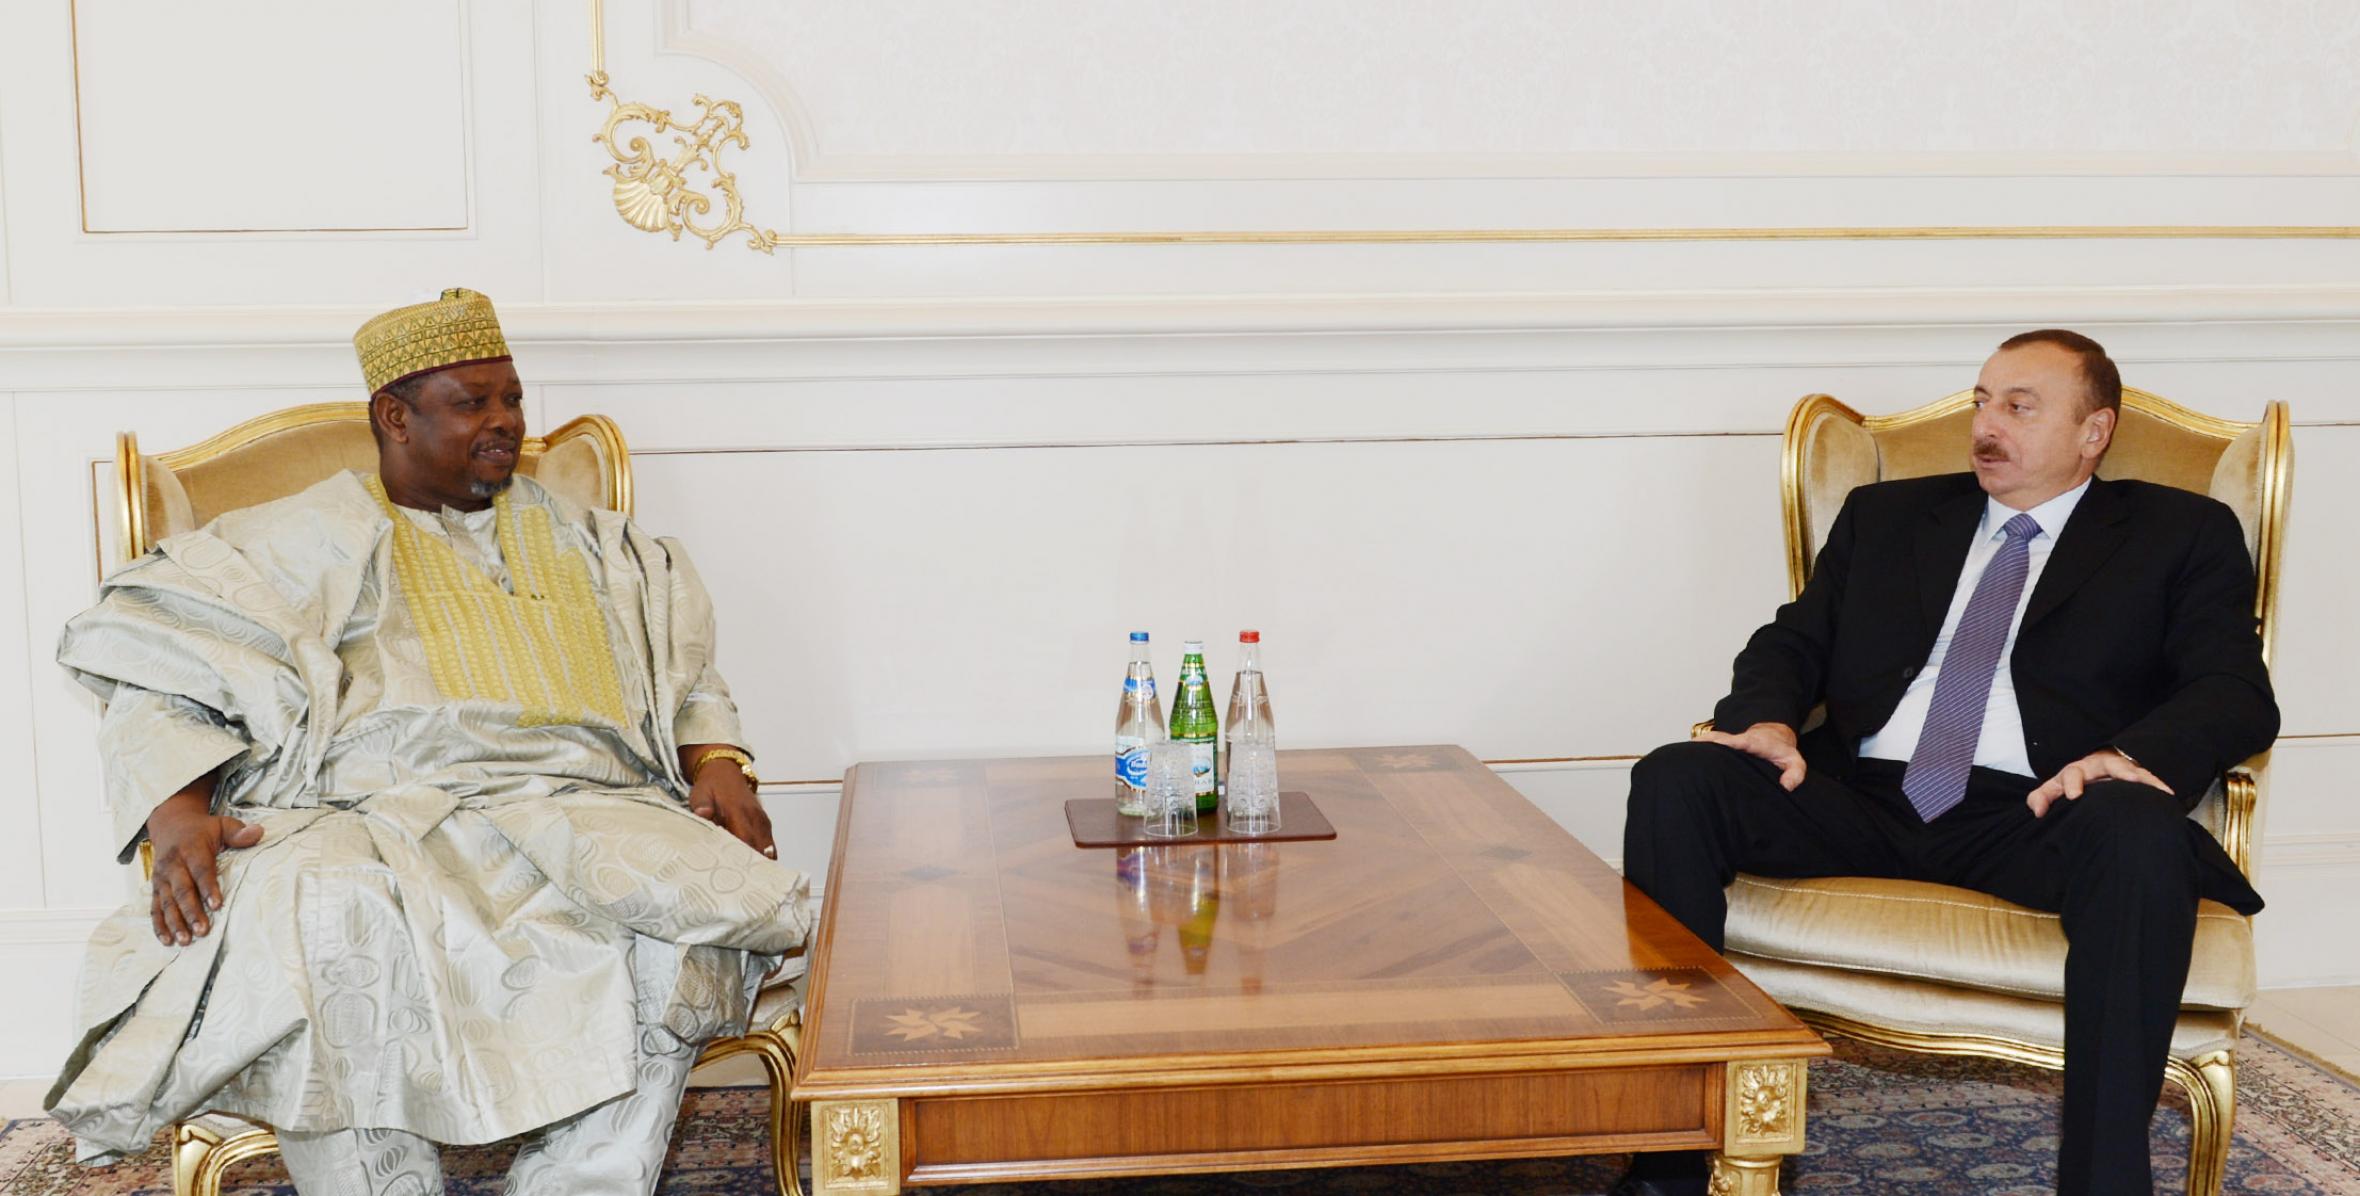 Ilham Aliyev accepted the credentials of a newly-appointed Ambassador Extraordinary and Plenipotentiary of Nigeria to Azerbaijan